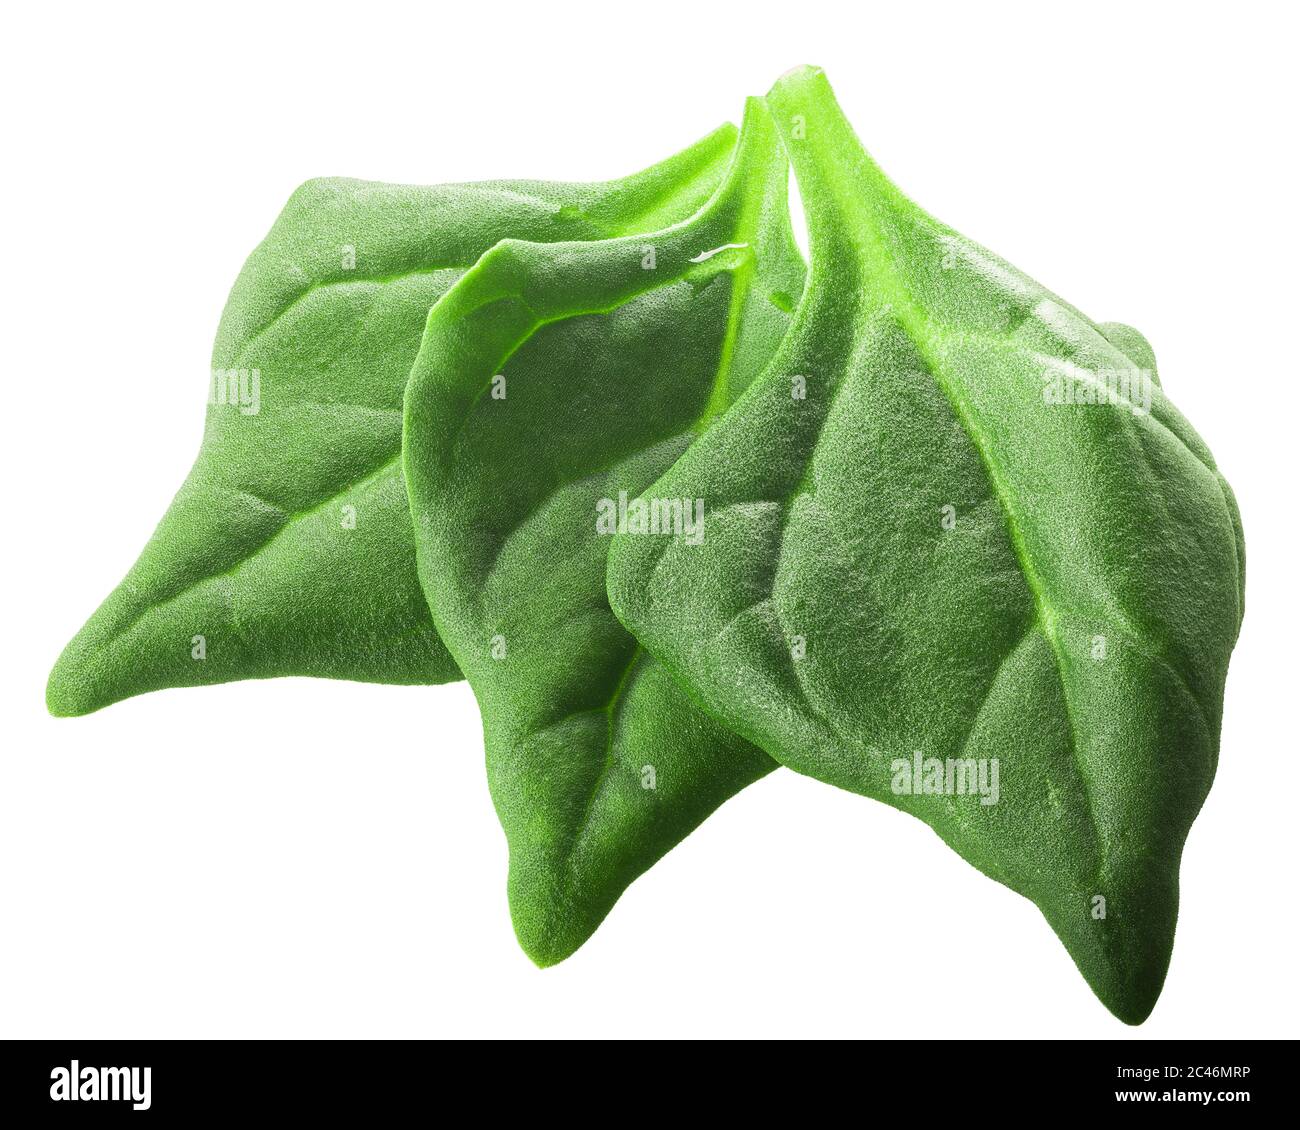 New Zealand spinach (Tetragonia tetragonoides) isolated w clipping paths, top view Stock Photo